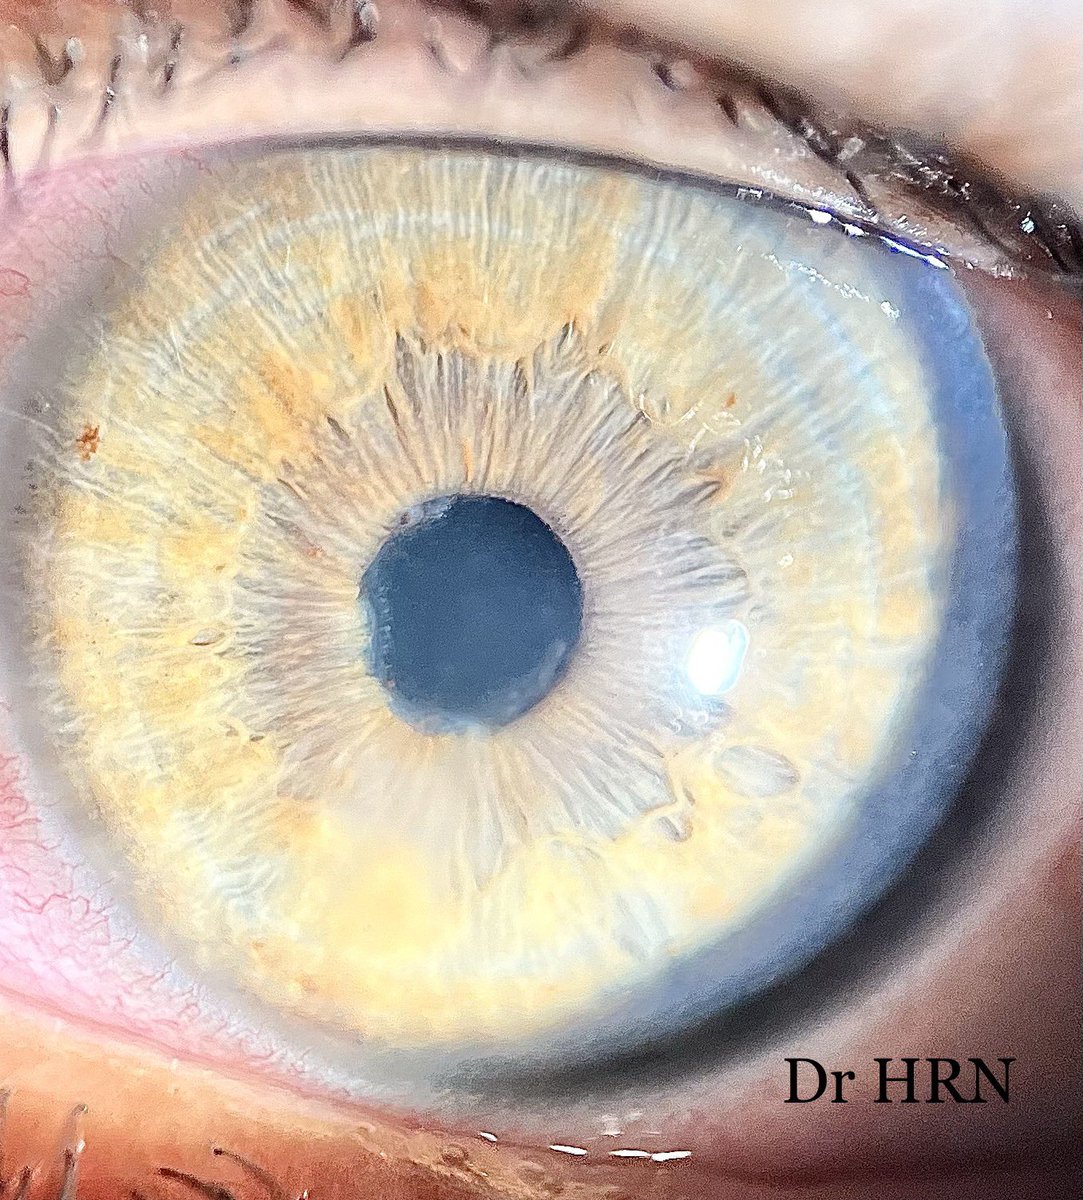 What would be your diagnosis here #OphthoTwitter ?? 

#OphthoX #MedTwitter #Ophthalmology